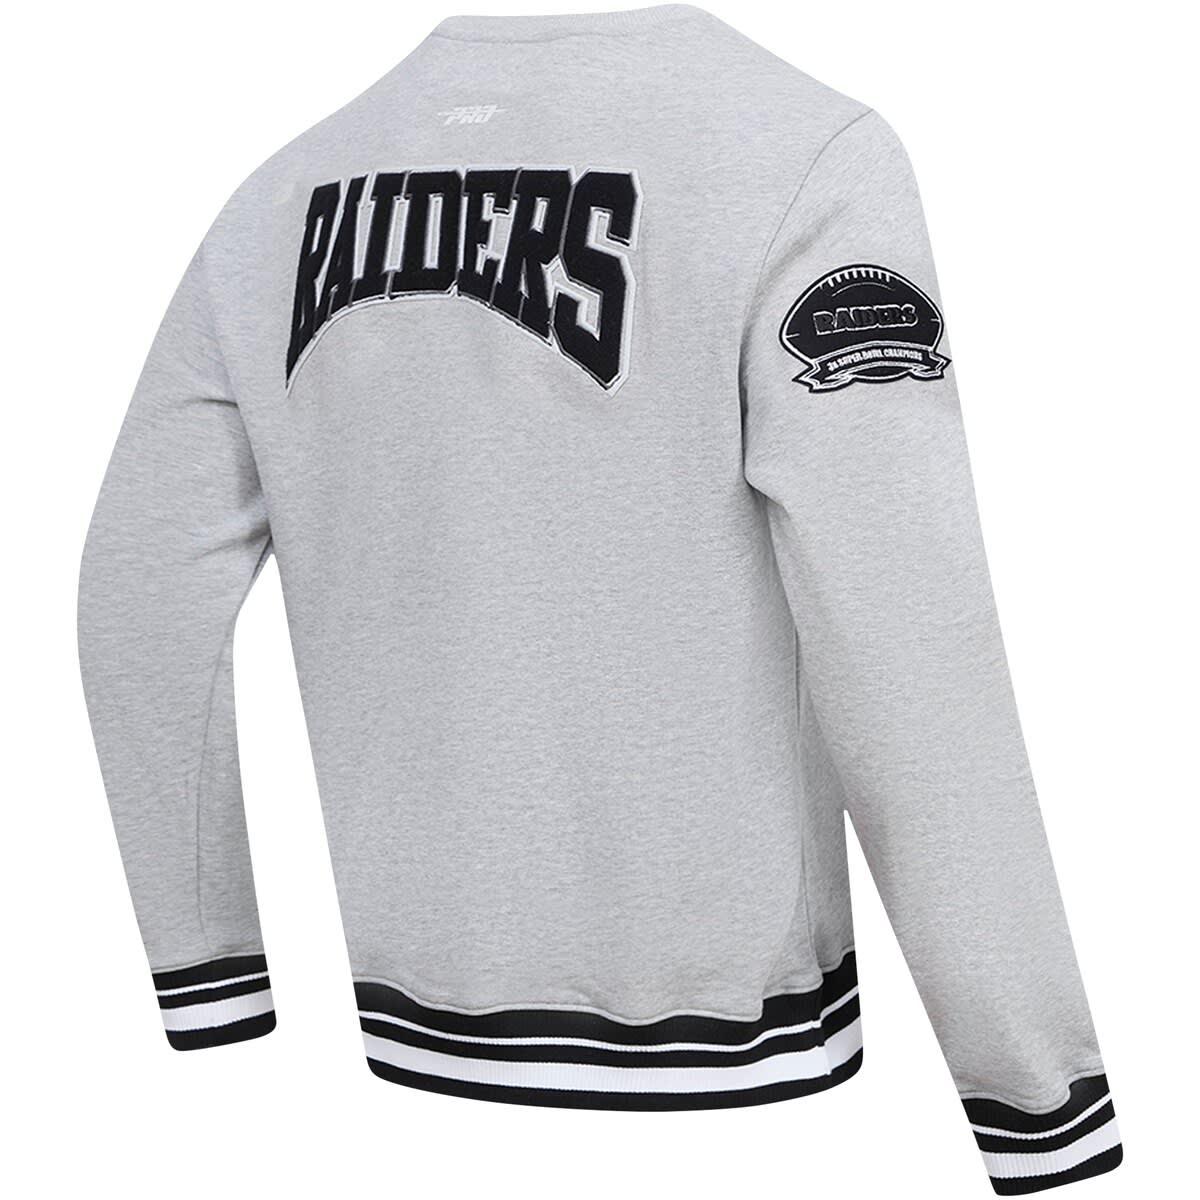 Pro Standard Heather Gray Los Angeles Chargers Crest Emblem Pullover Sweatshirt